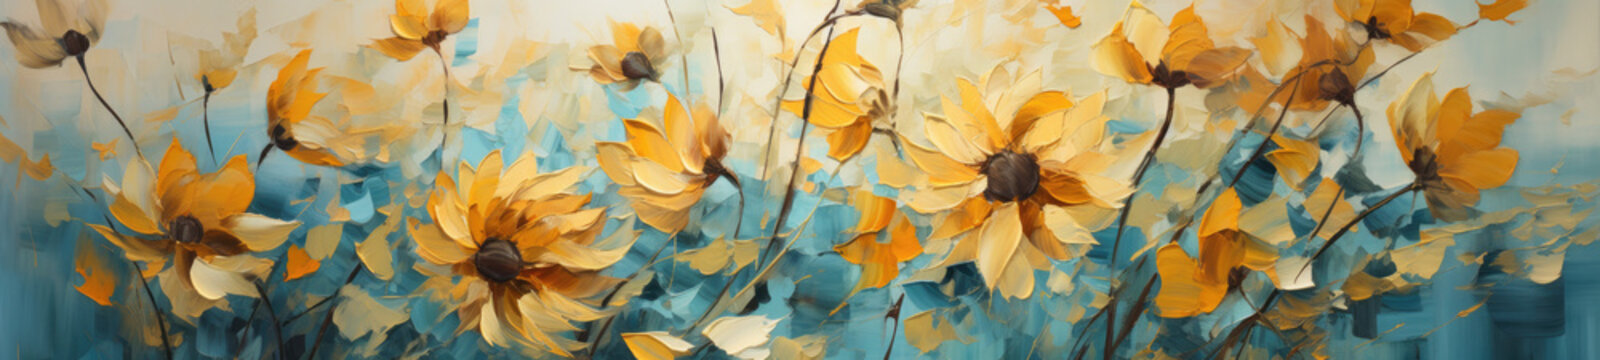 In this abstract oil and acrylic painting, a sunflower stands out against a textured canvas background, merging the beauty of nature with artistic texture, suitable for both wallpaper and artwork.